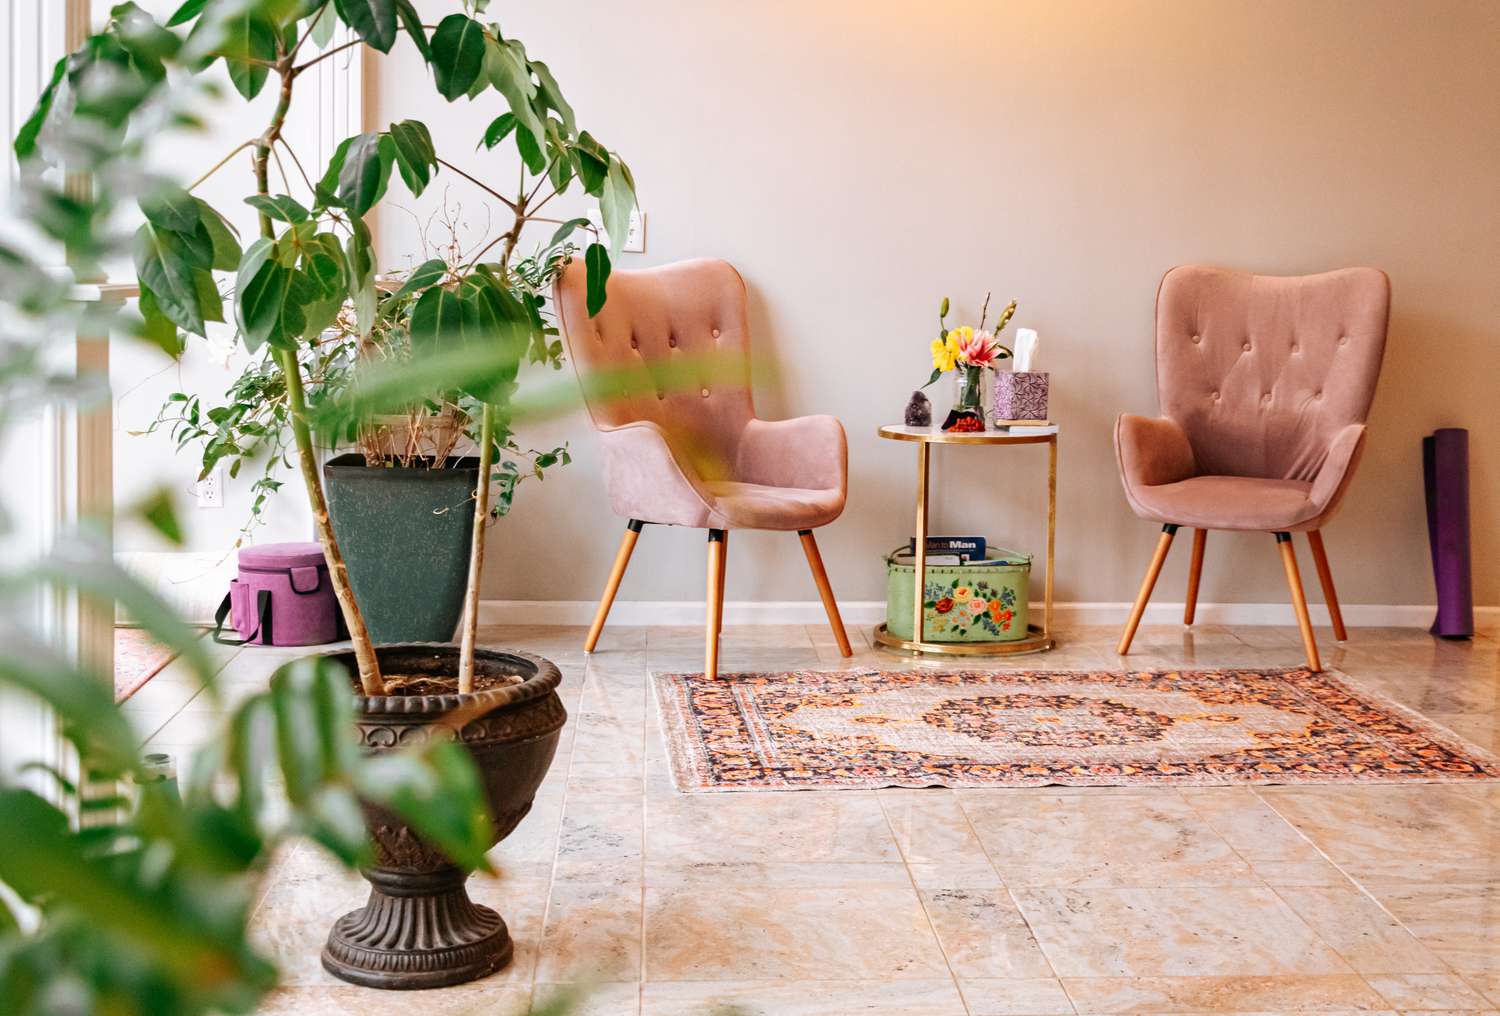 home interior with two pink chairs, a rug, and plants